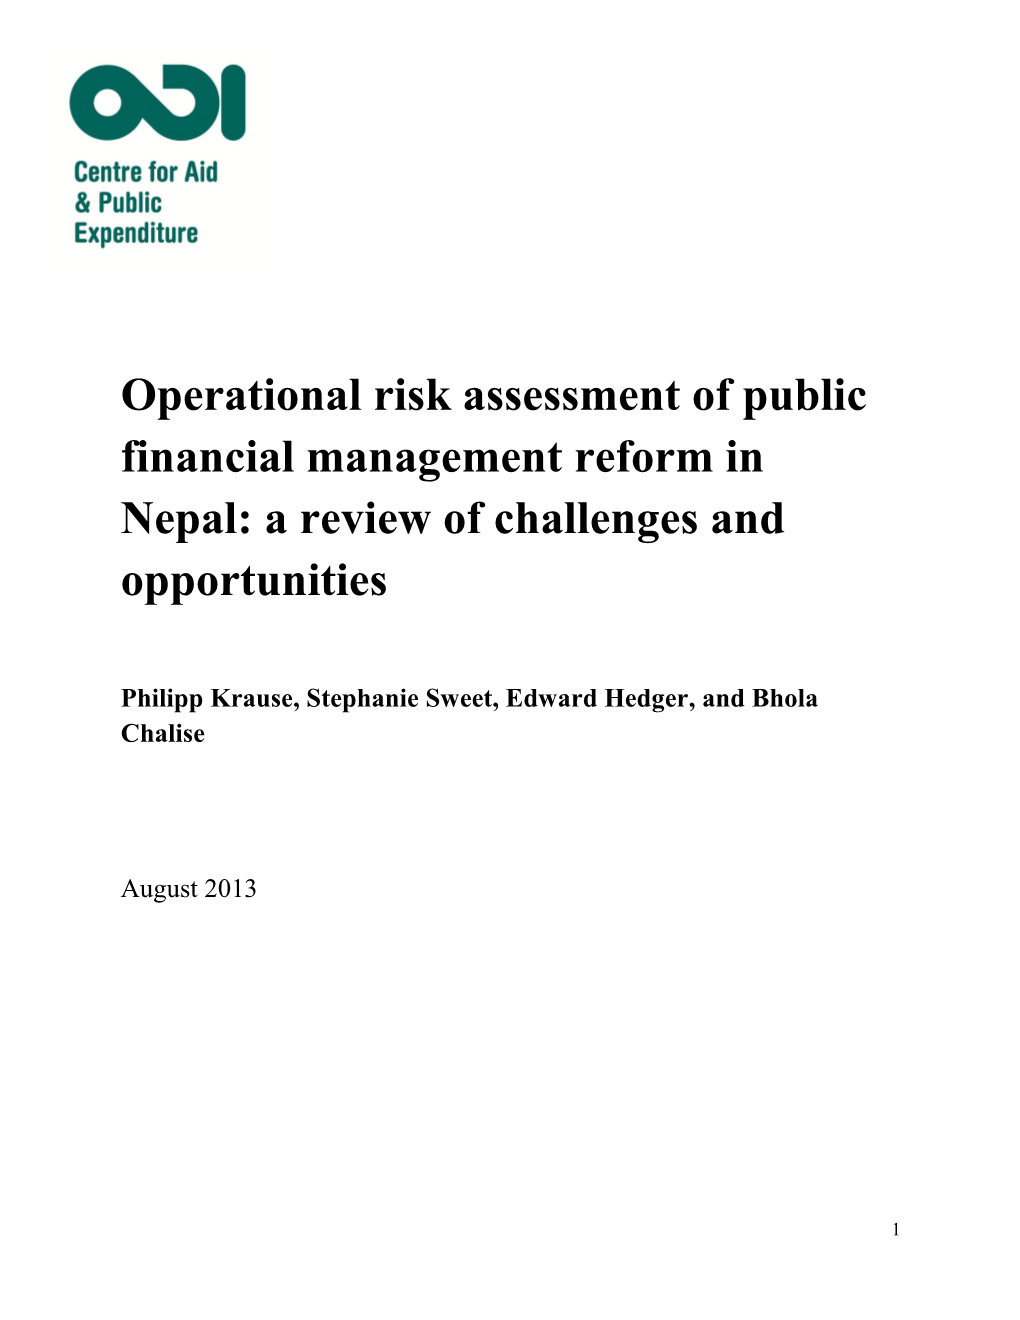 Operational Risk Assessment of Public Financial Management Reform in Nepal: a Review of Challenges and Opportunities